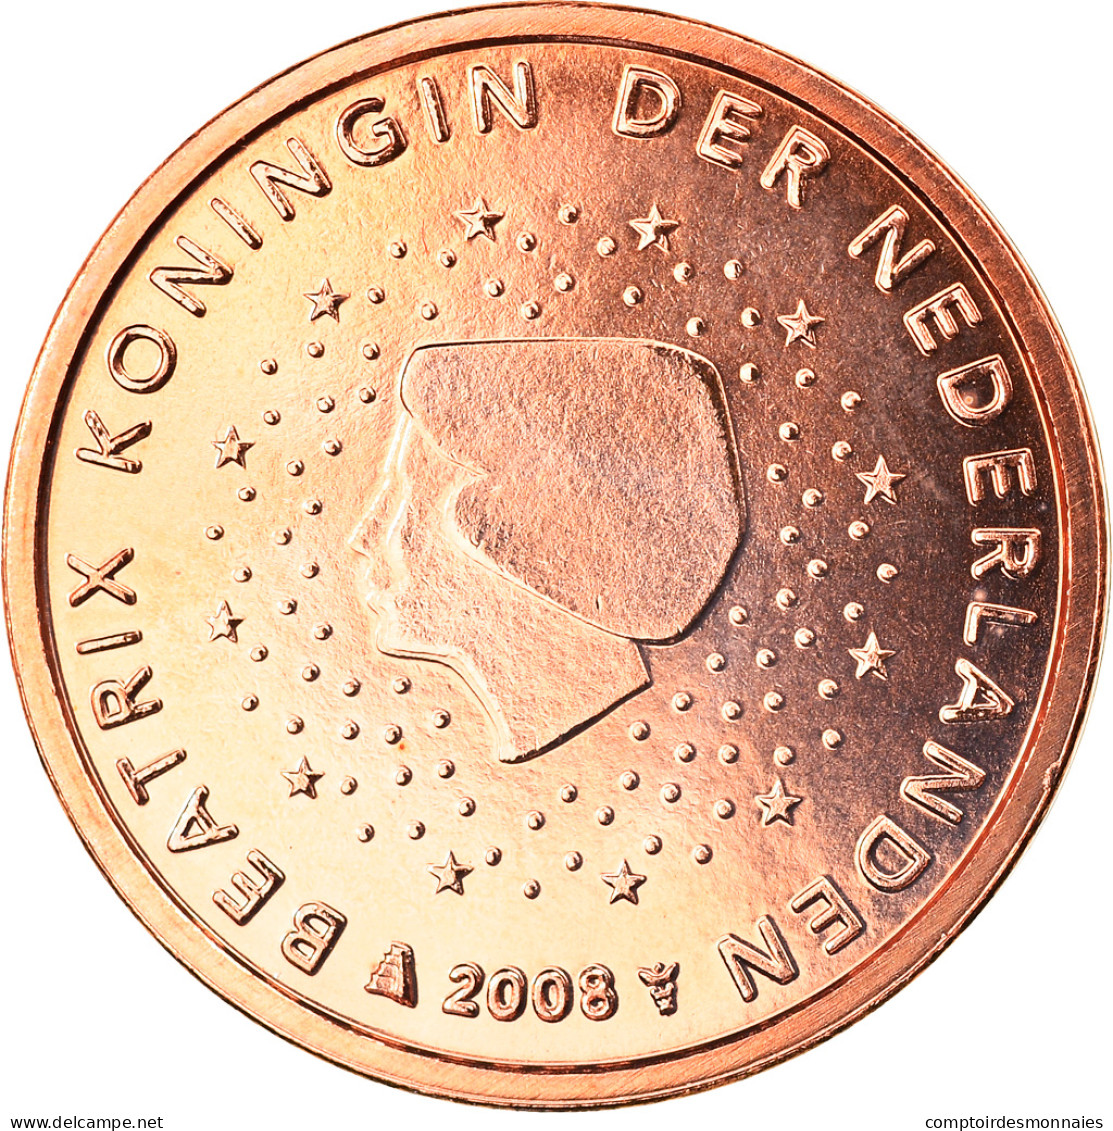 Pays-Bas, 2 Euro Cent, 2008, Utrecht, FDC, Copper Plated Steel, KM:235 - Pays-Bas